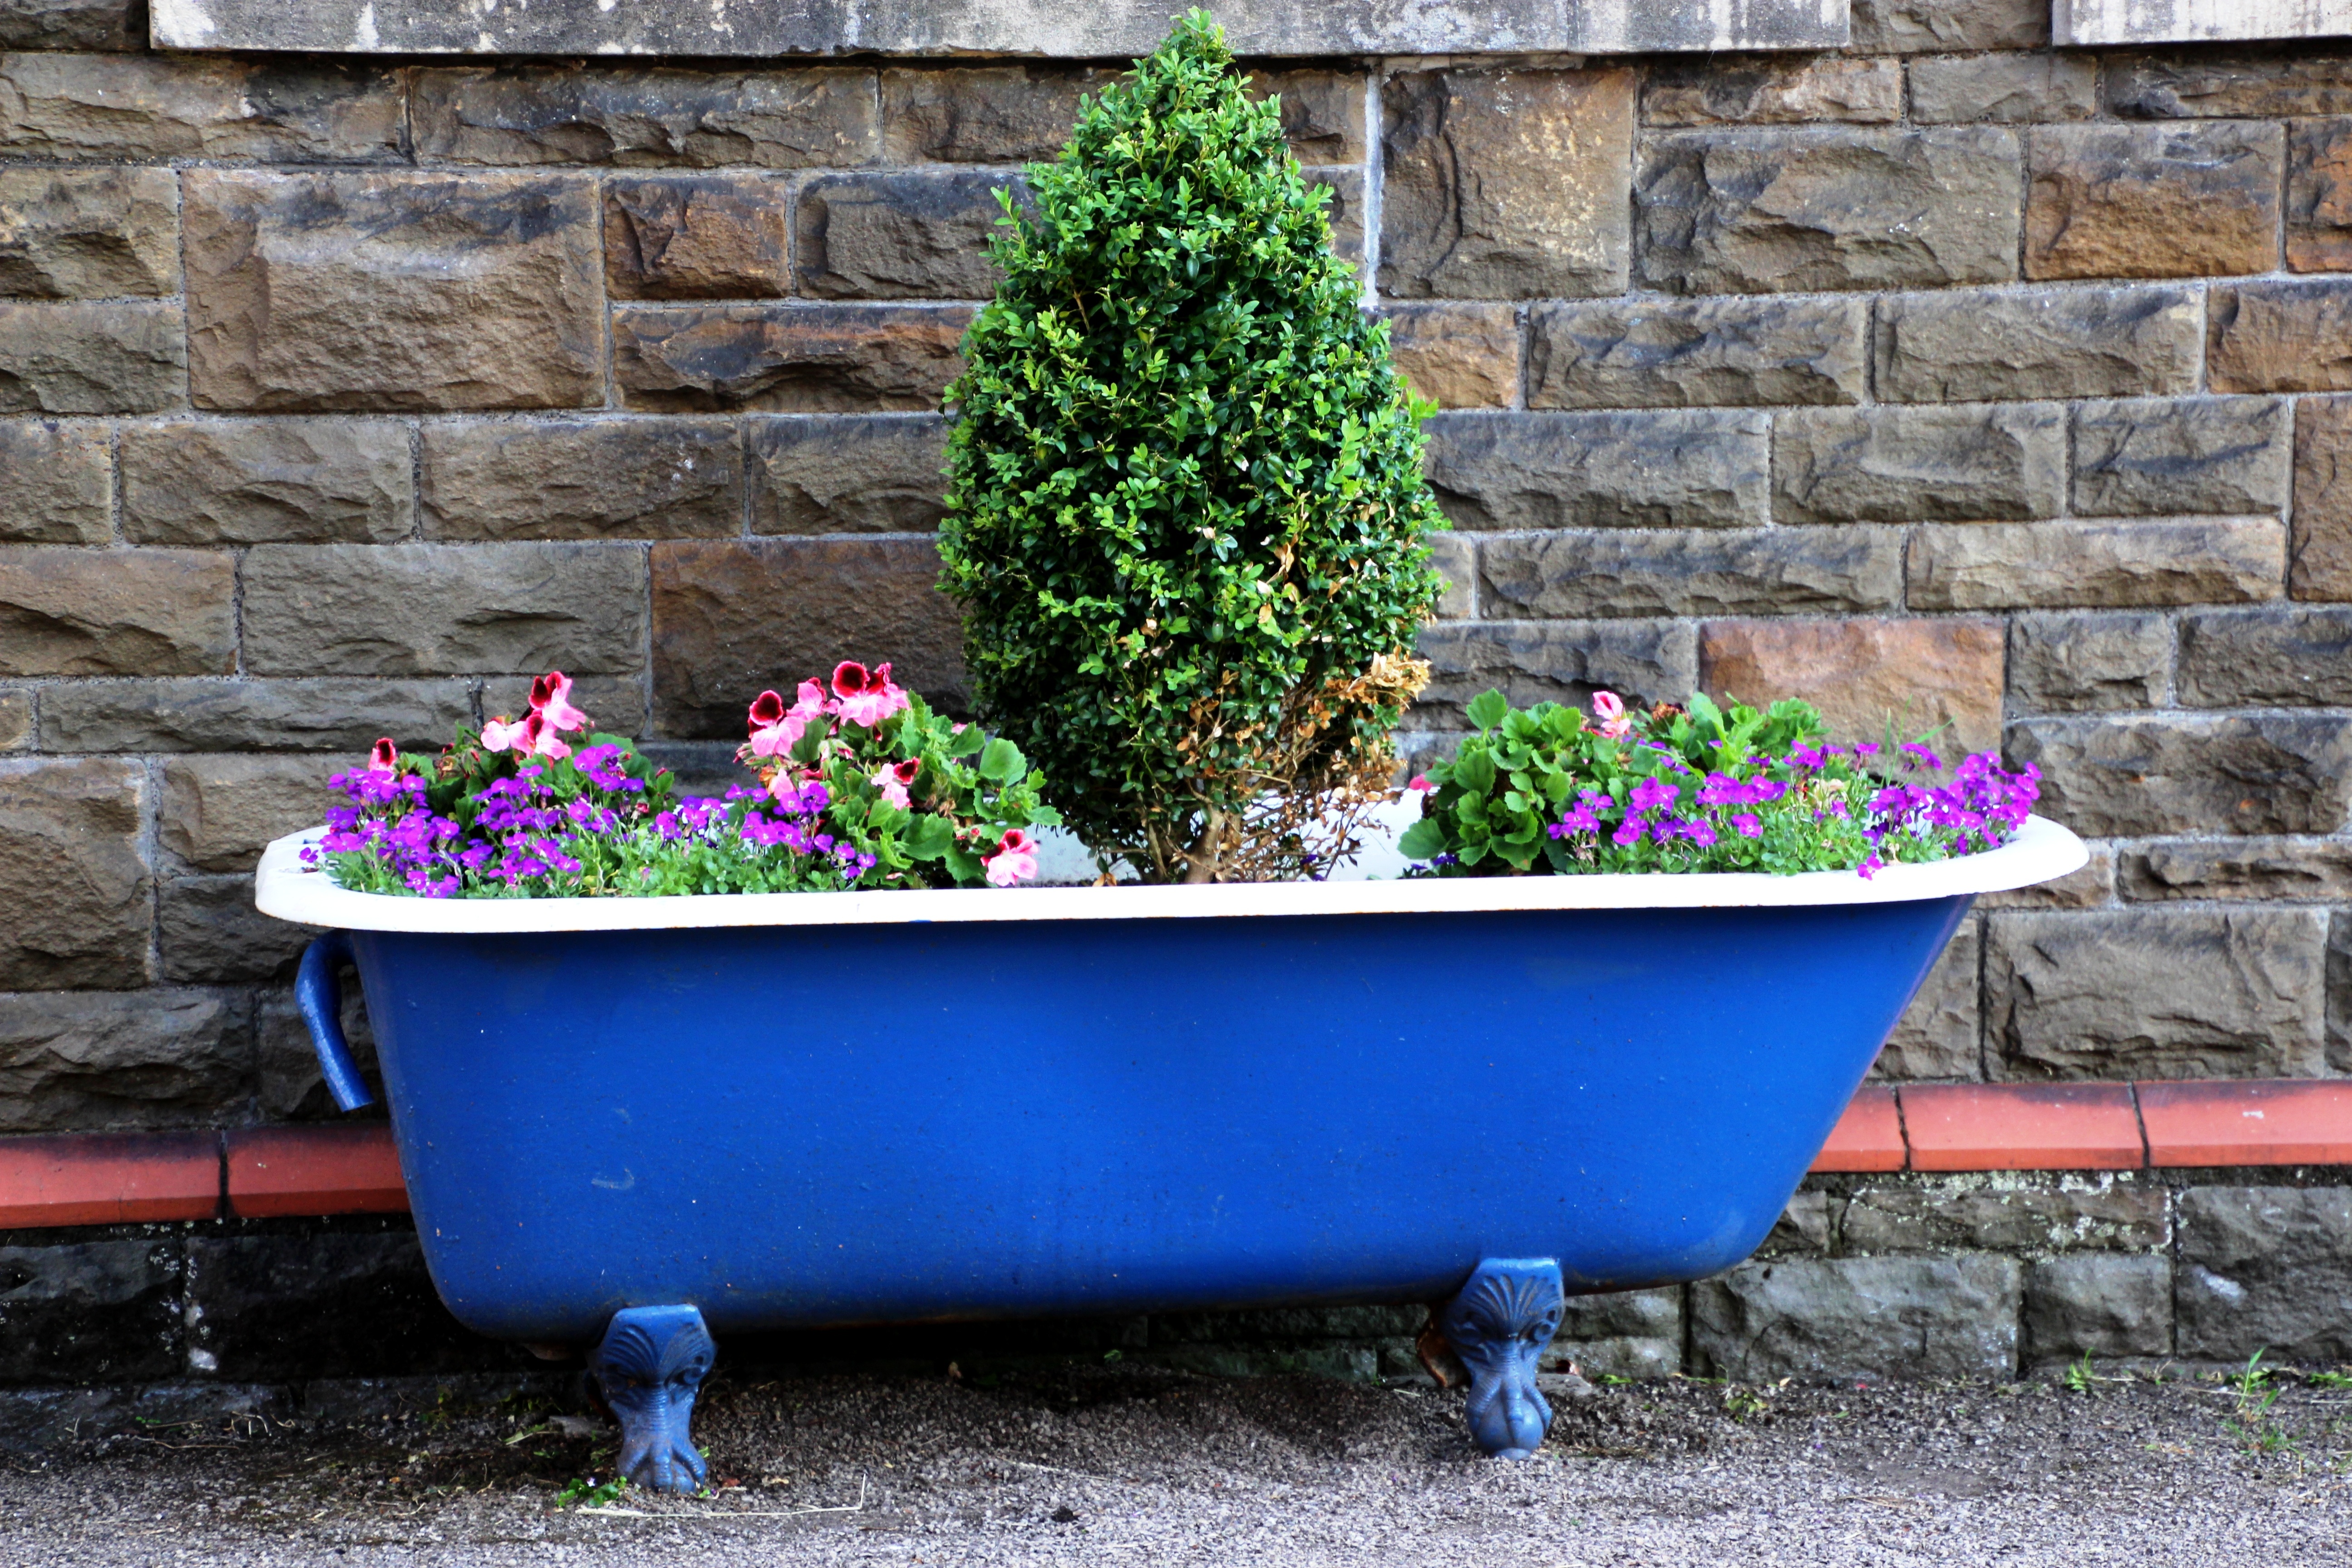 Flowers and a small tree in a blue bathtub.